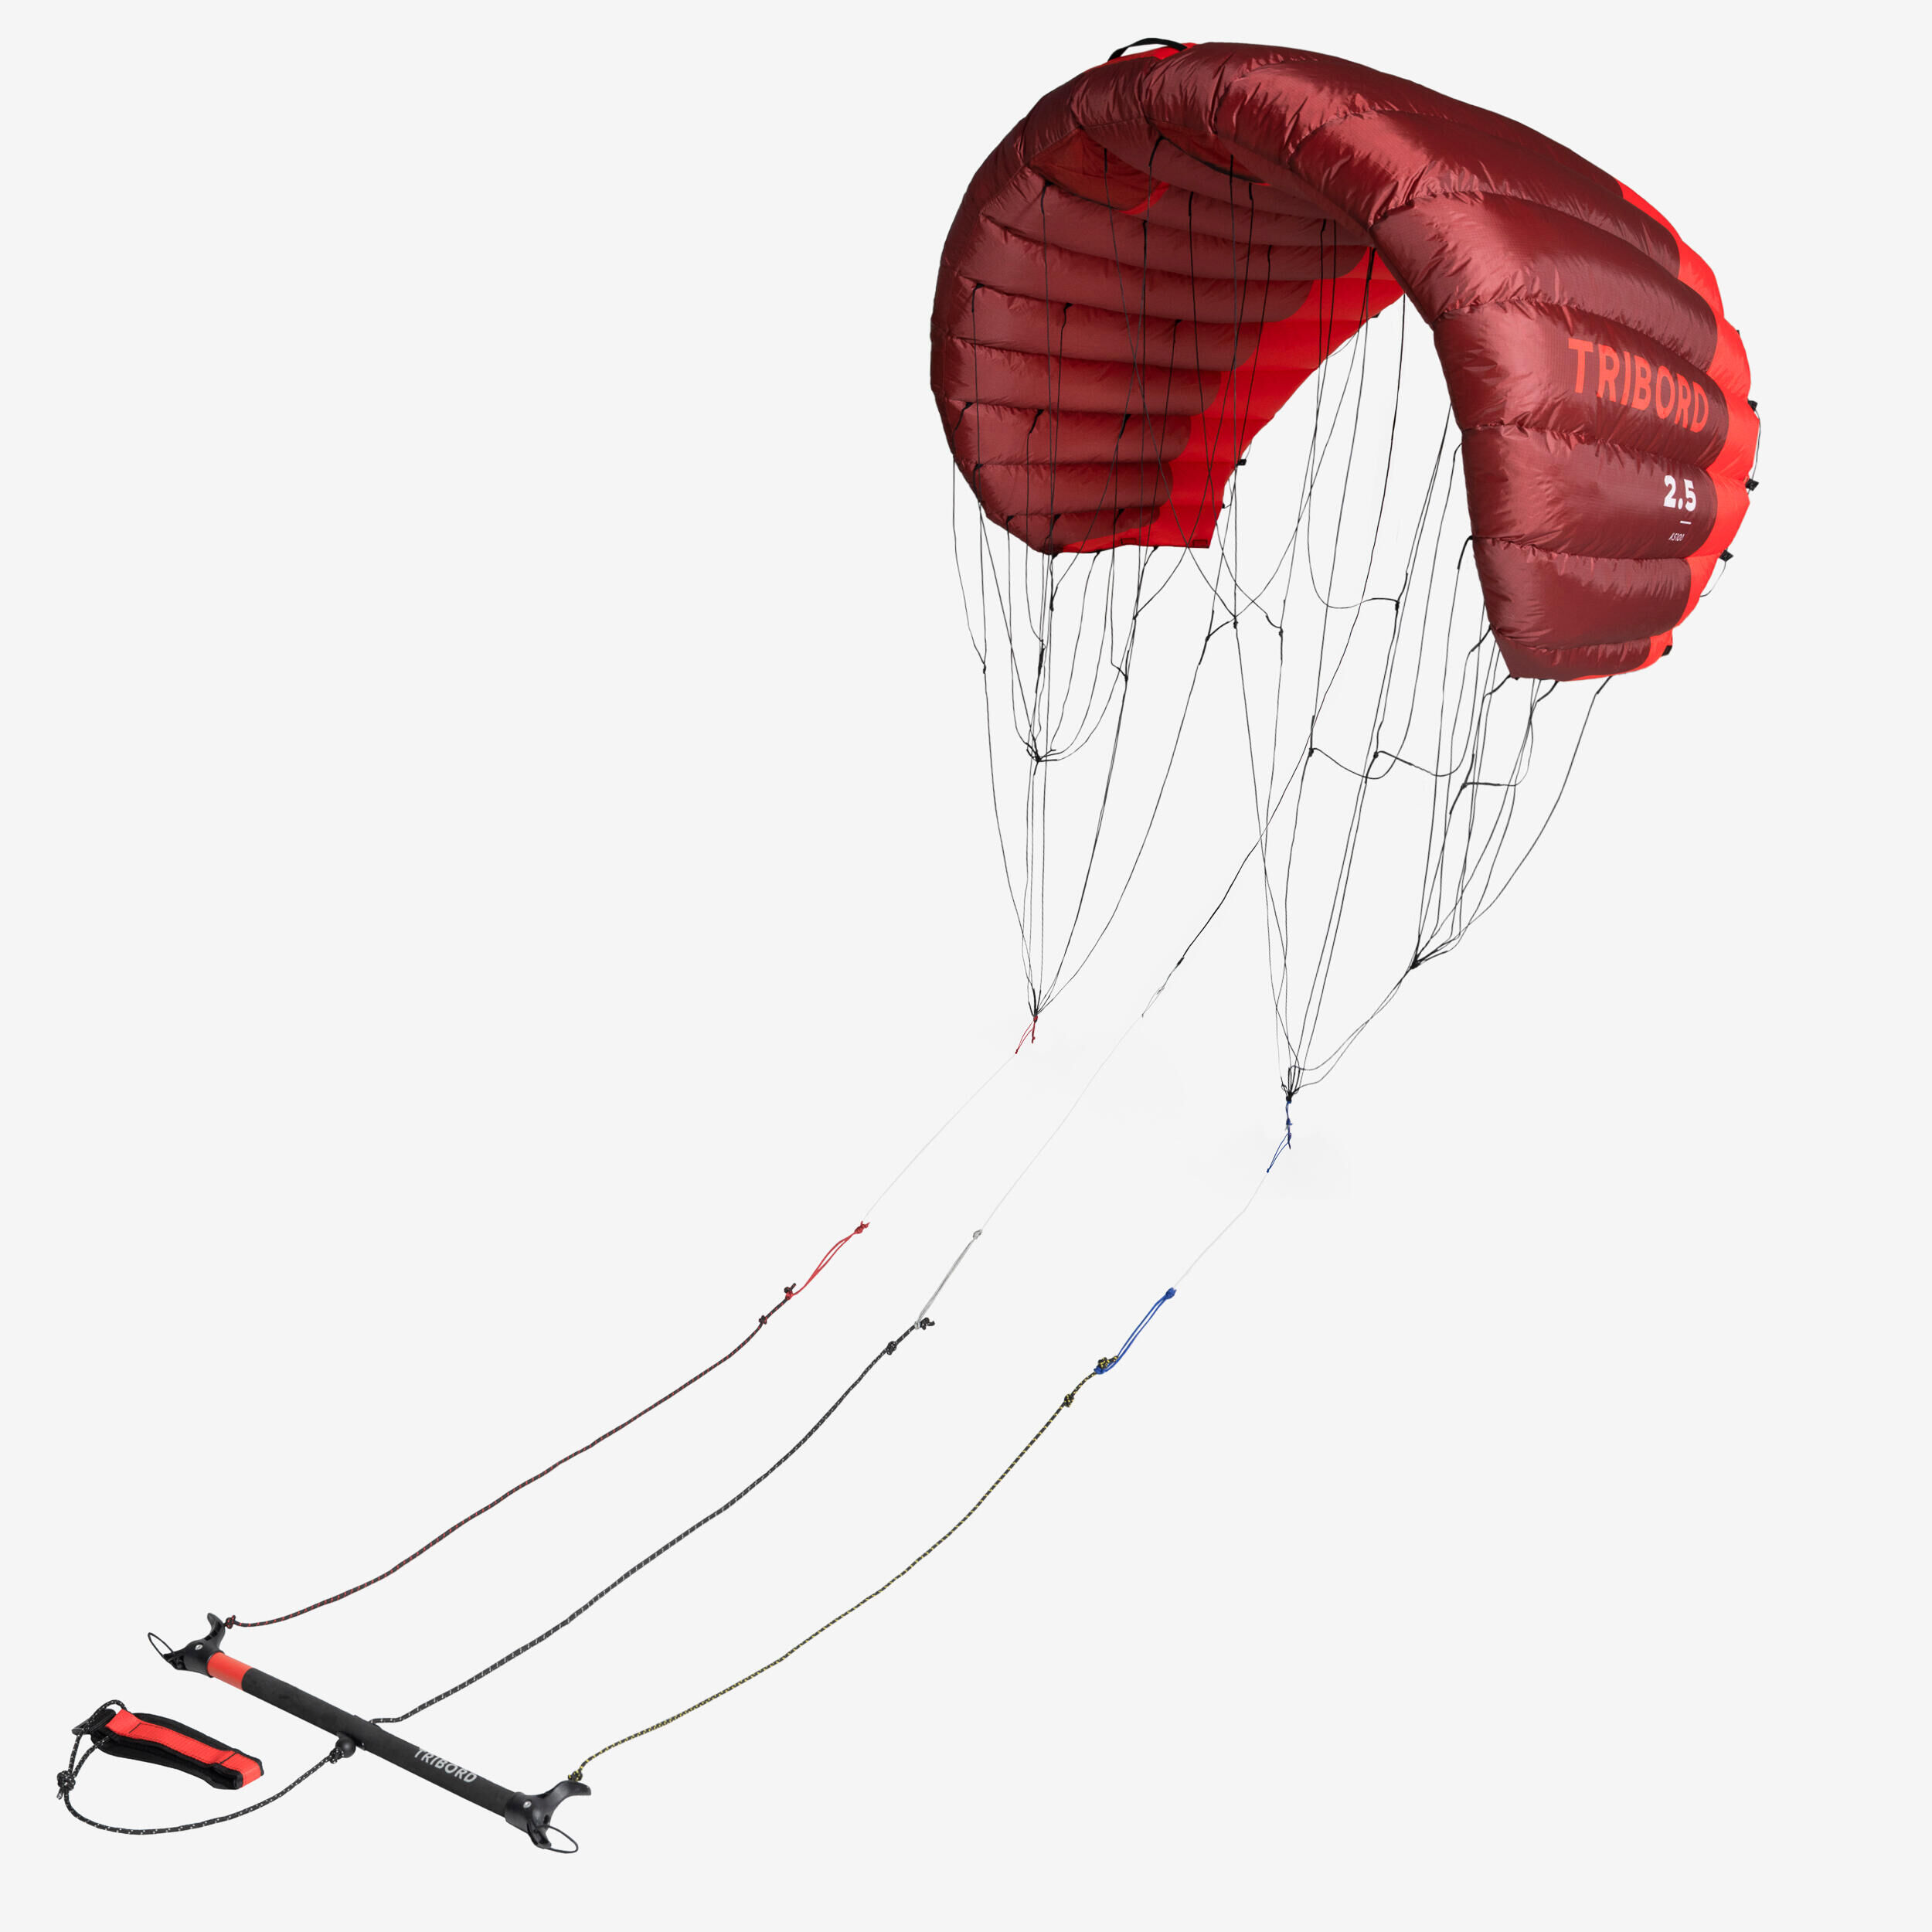 ORAO TRACTION KITE KS100 2.5 m2 red - with bar